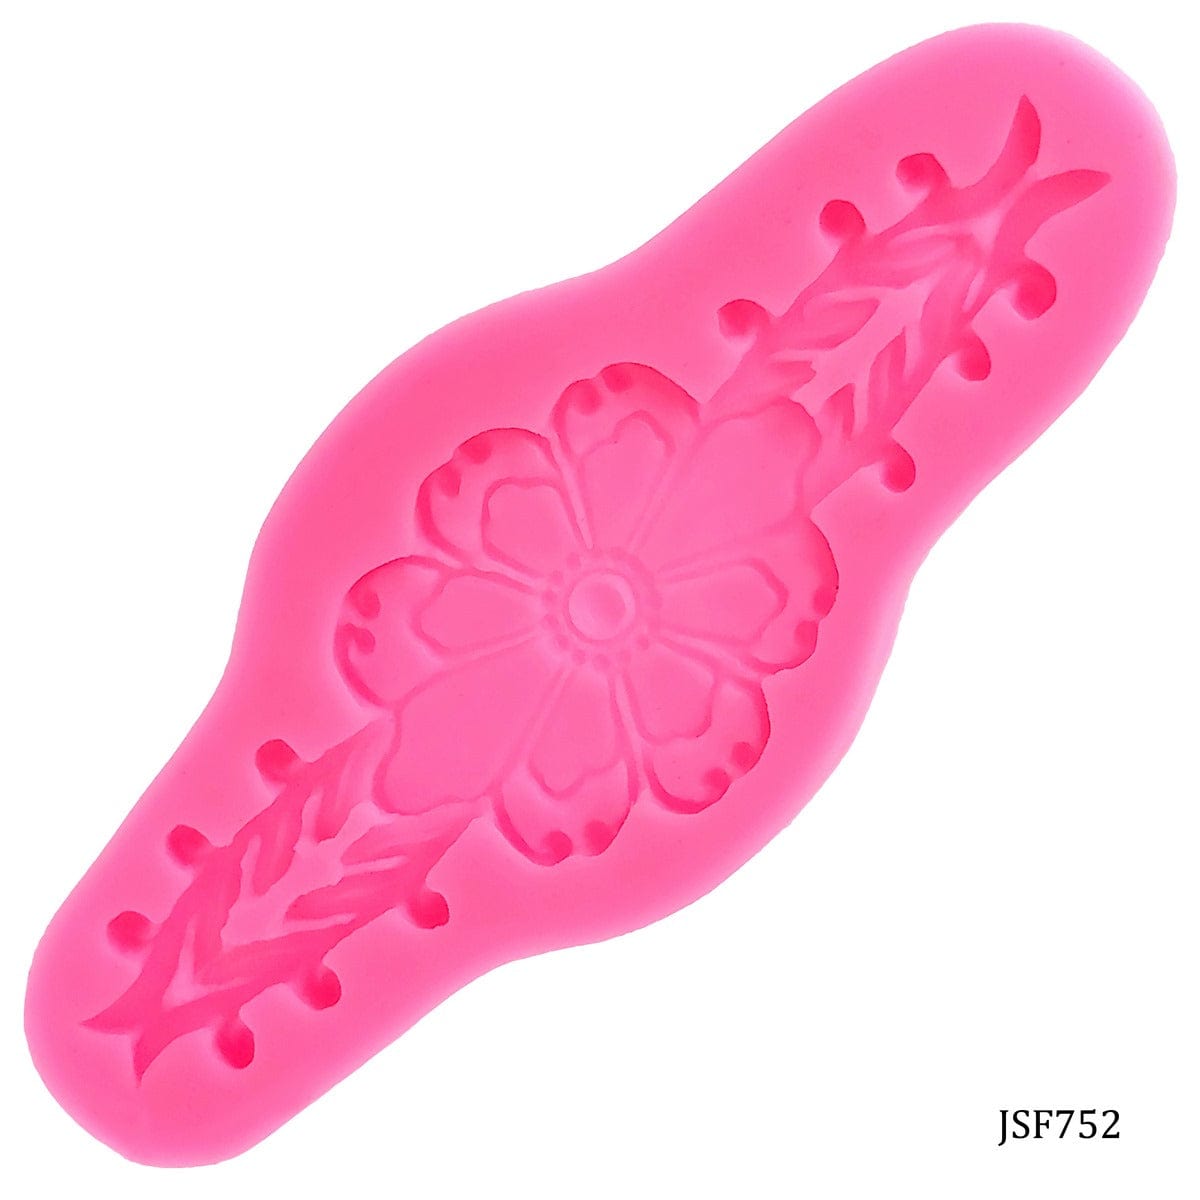 jags-mumbai Mould Silicone Mould Flowers Strips Border JSF752